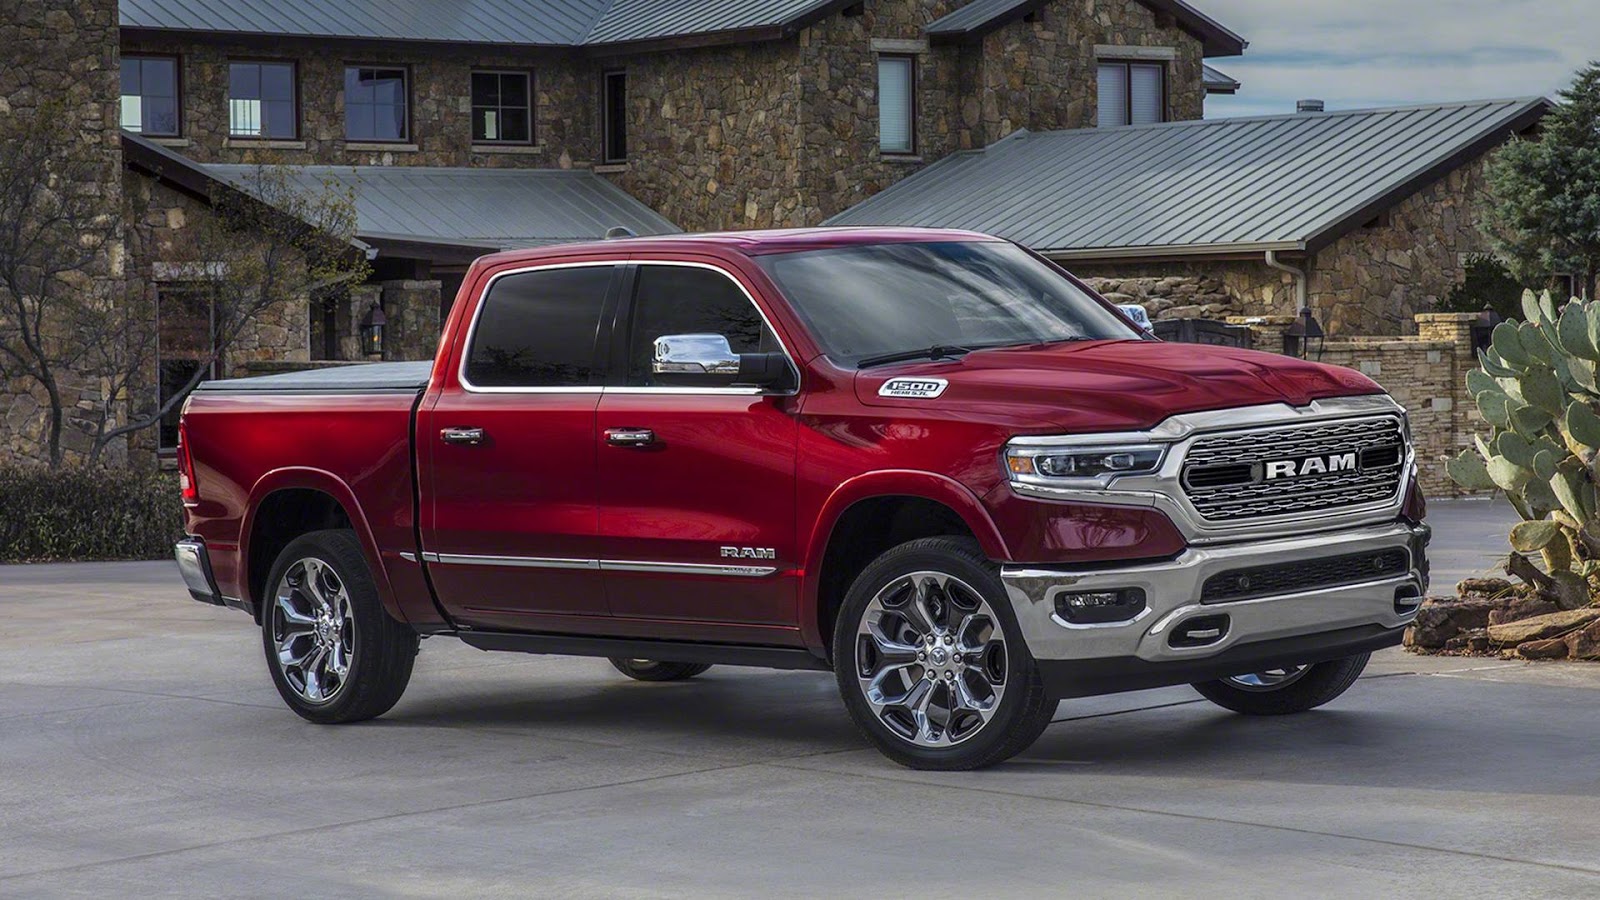 2019 Ram 1500 Easter Egg Is An Indicator For The 707-HP ...